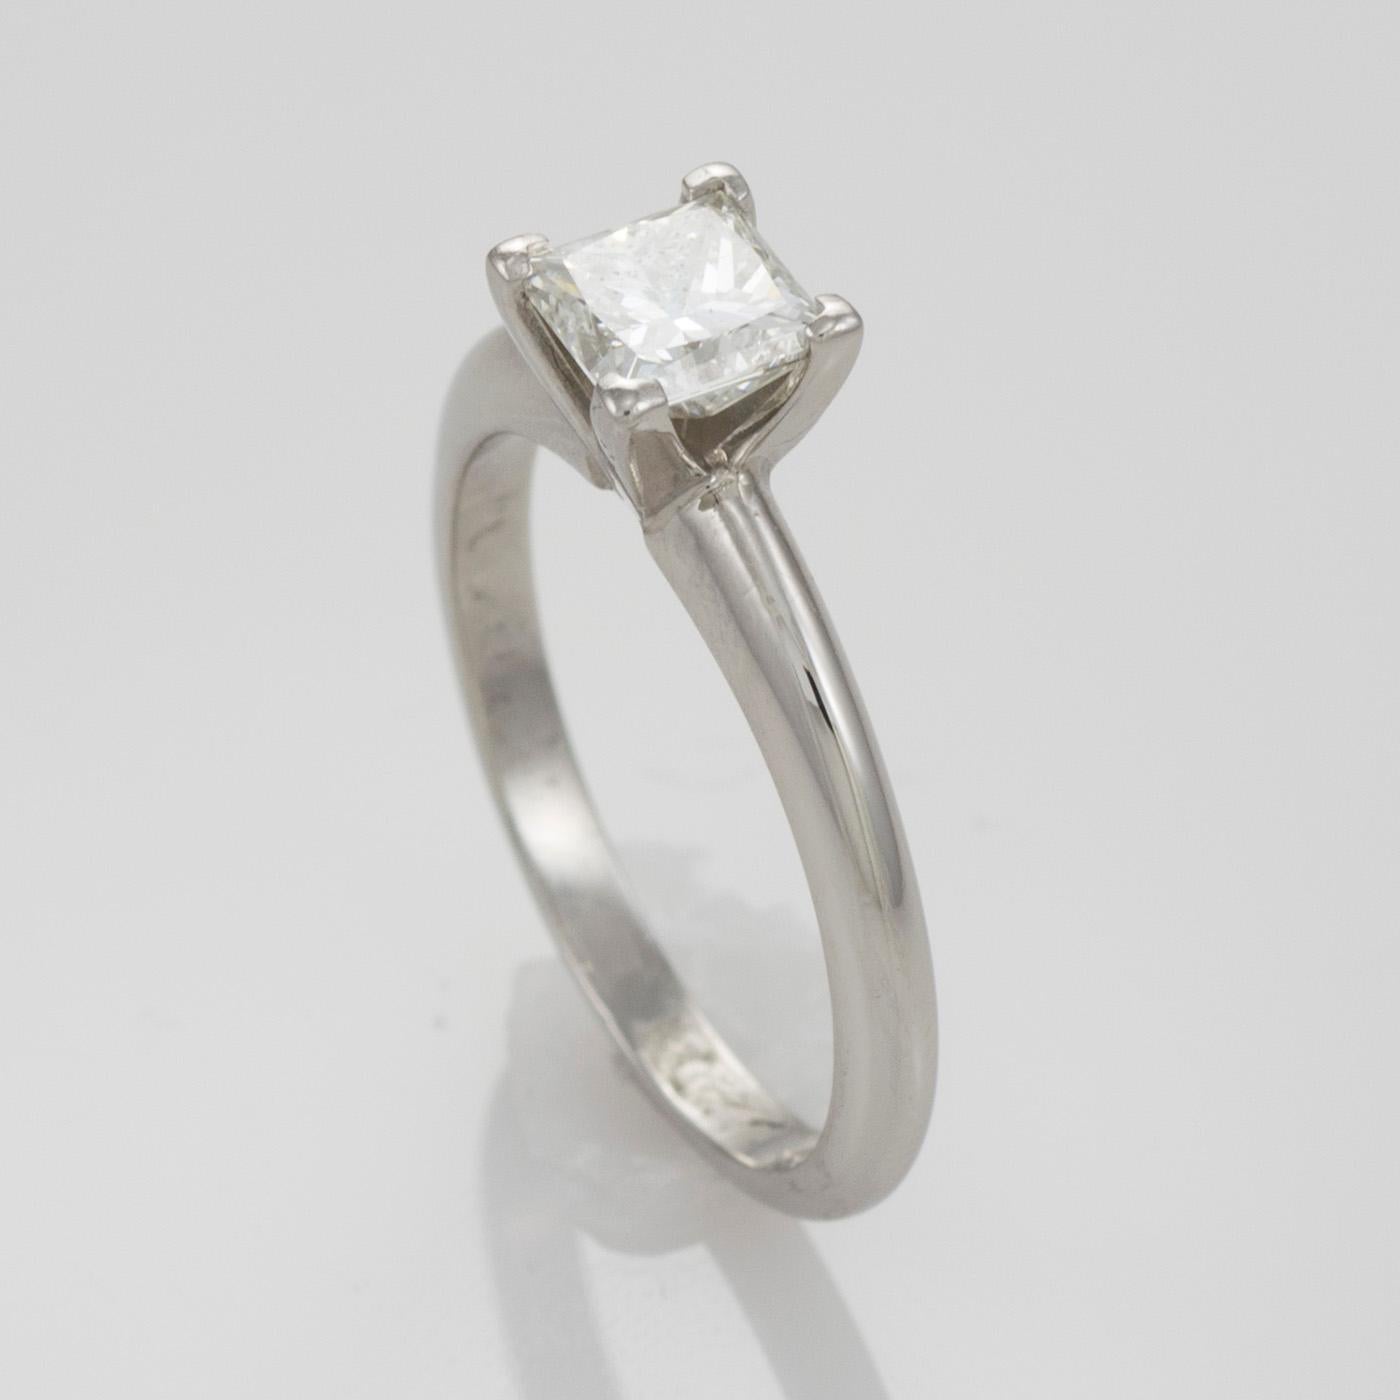 Ladies Platinum ring with princess cut diamond.

Stamped .950 Pt and weighs 4.3 grams.

The diamonds is a square modified brilliant cut, .74 carat, I color, VS1 clarity.

The diamond is laser inscribed with the GIA certification number 15484606 on